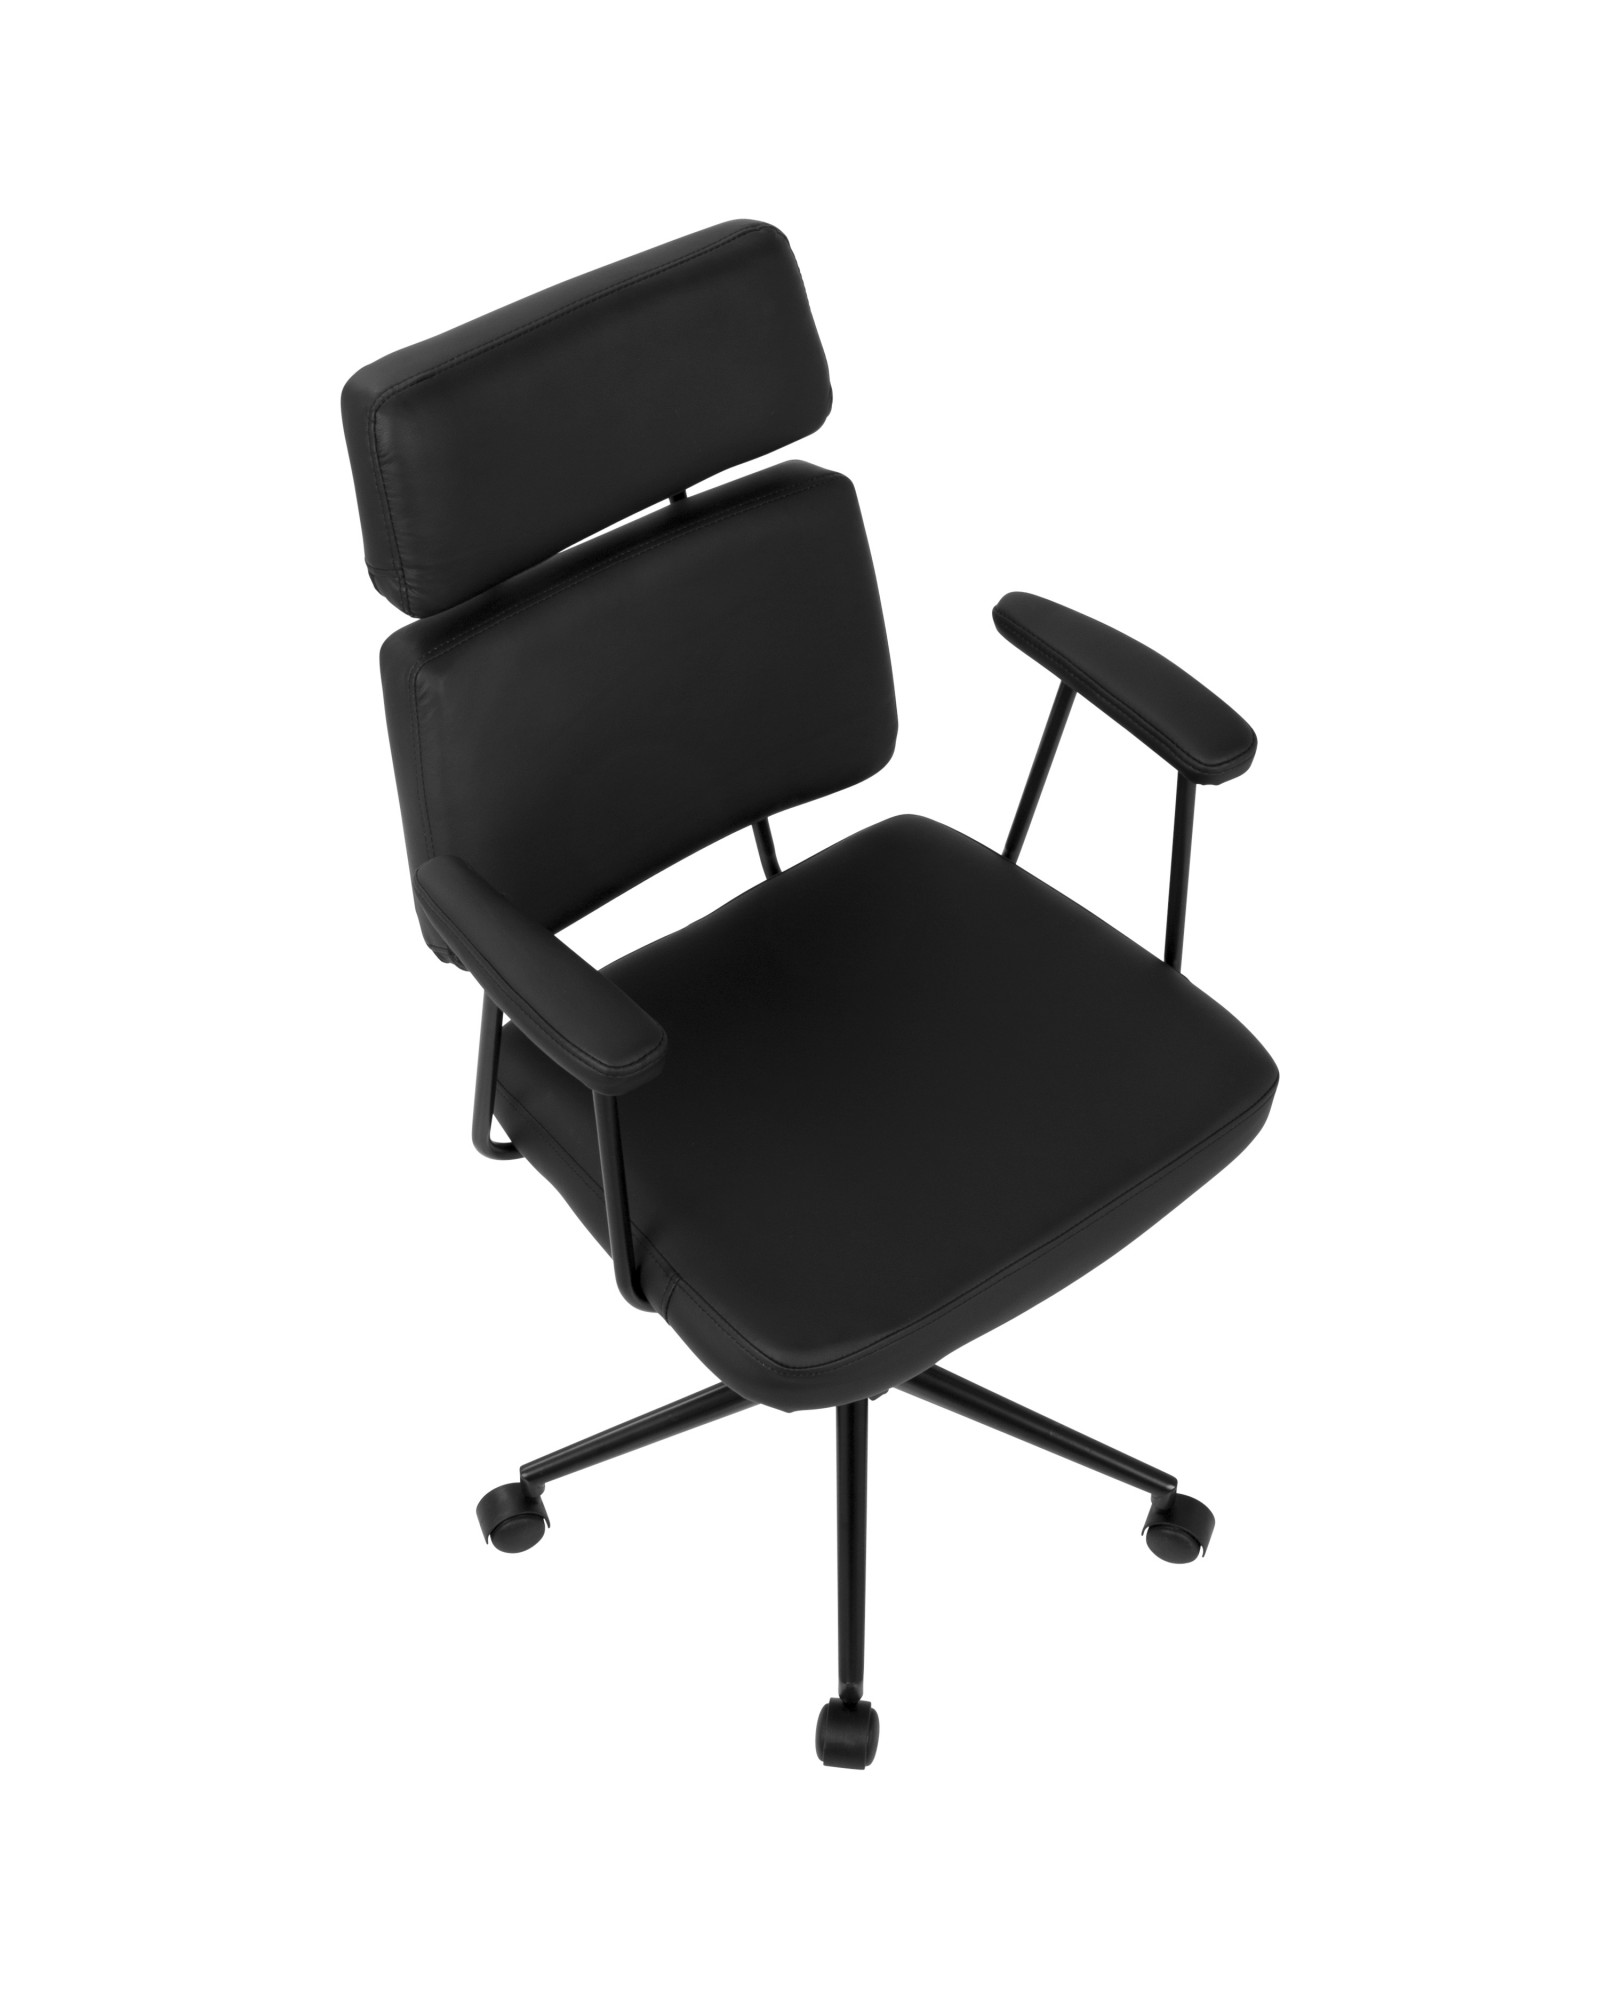 Sigmund Contemporary Adjustable Office Chair in Black Faux Leather